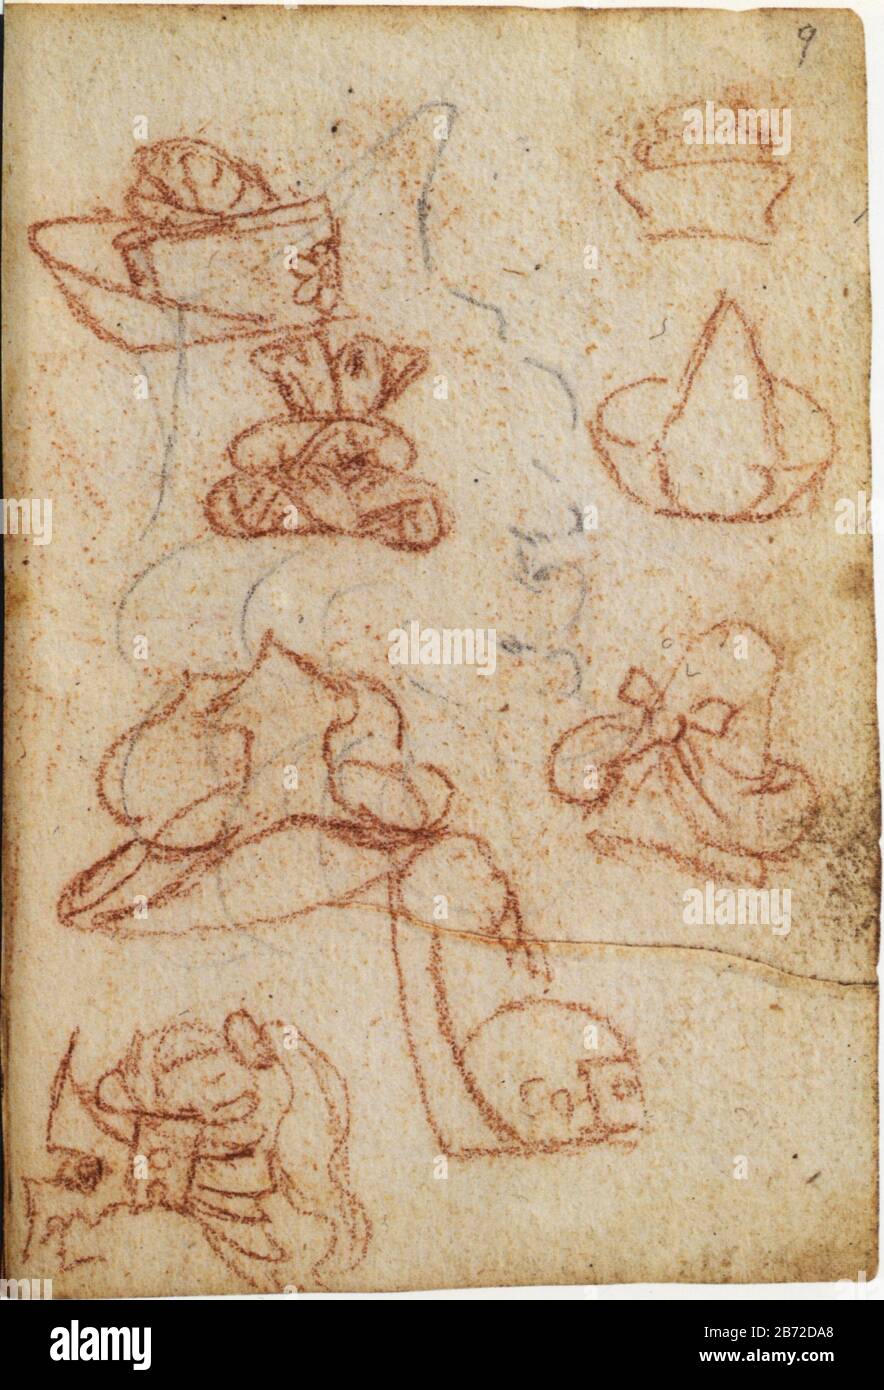 Leonardo da Vinci. Drawings of hats, ribbons and other objects for masquerade costumes. Detail. 1493-1496 Stock Photo